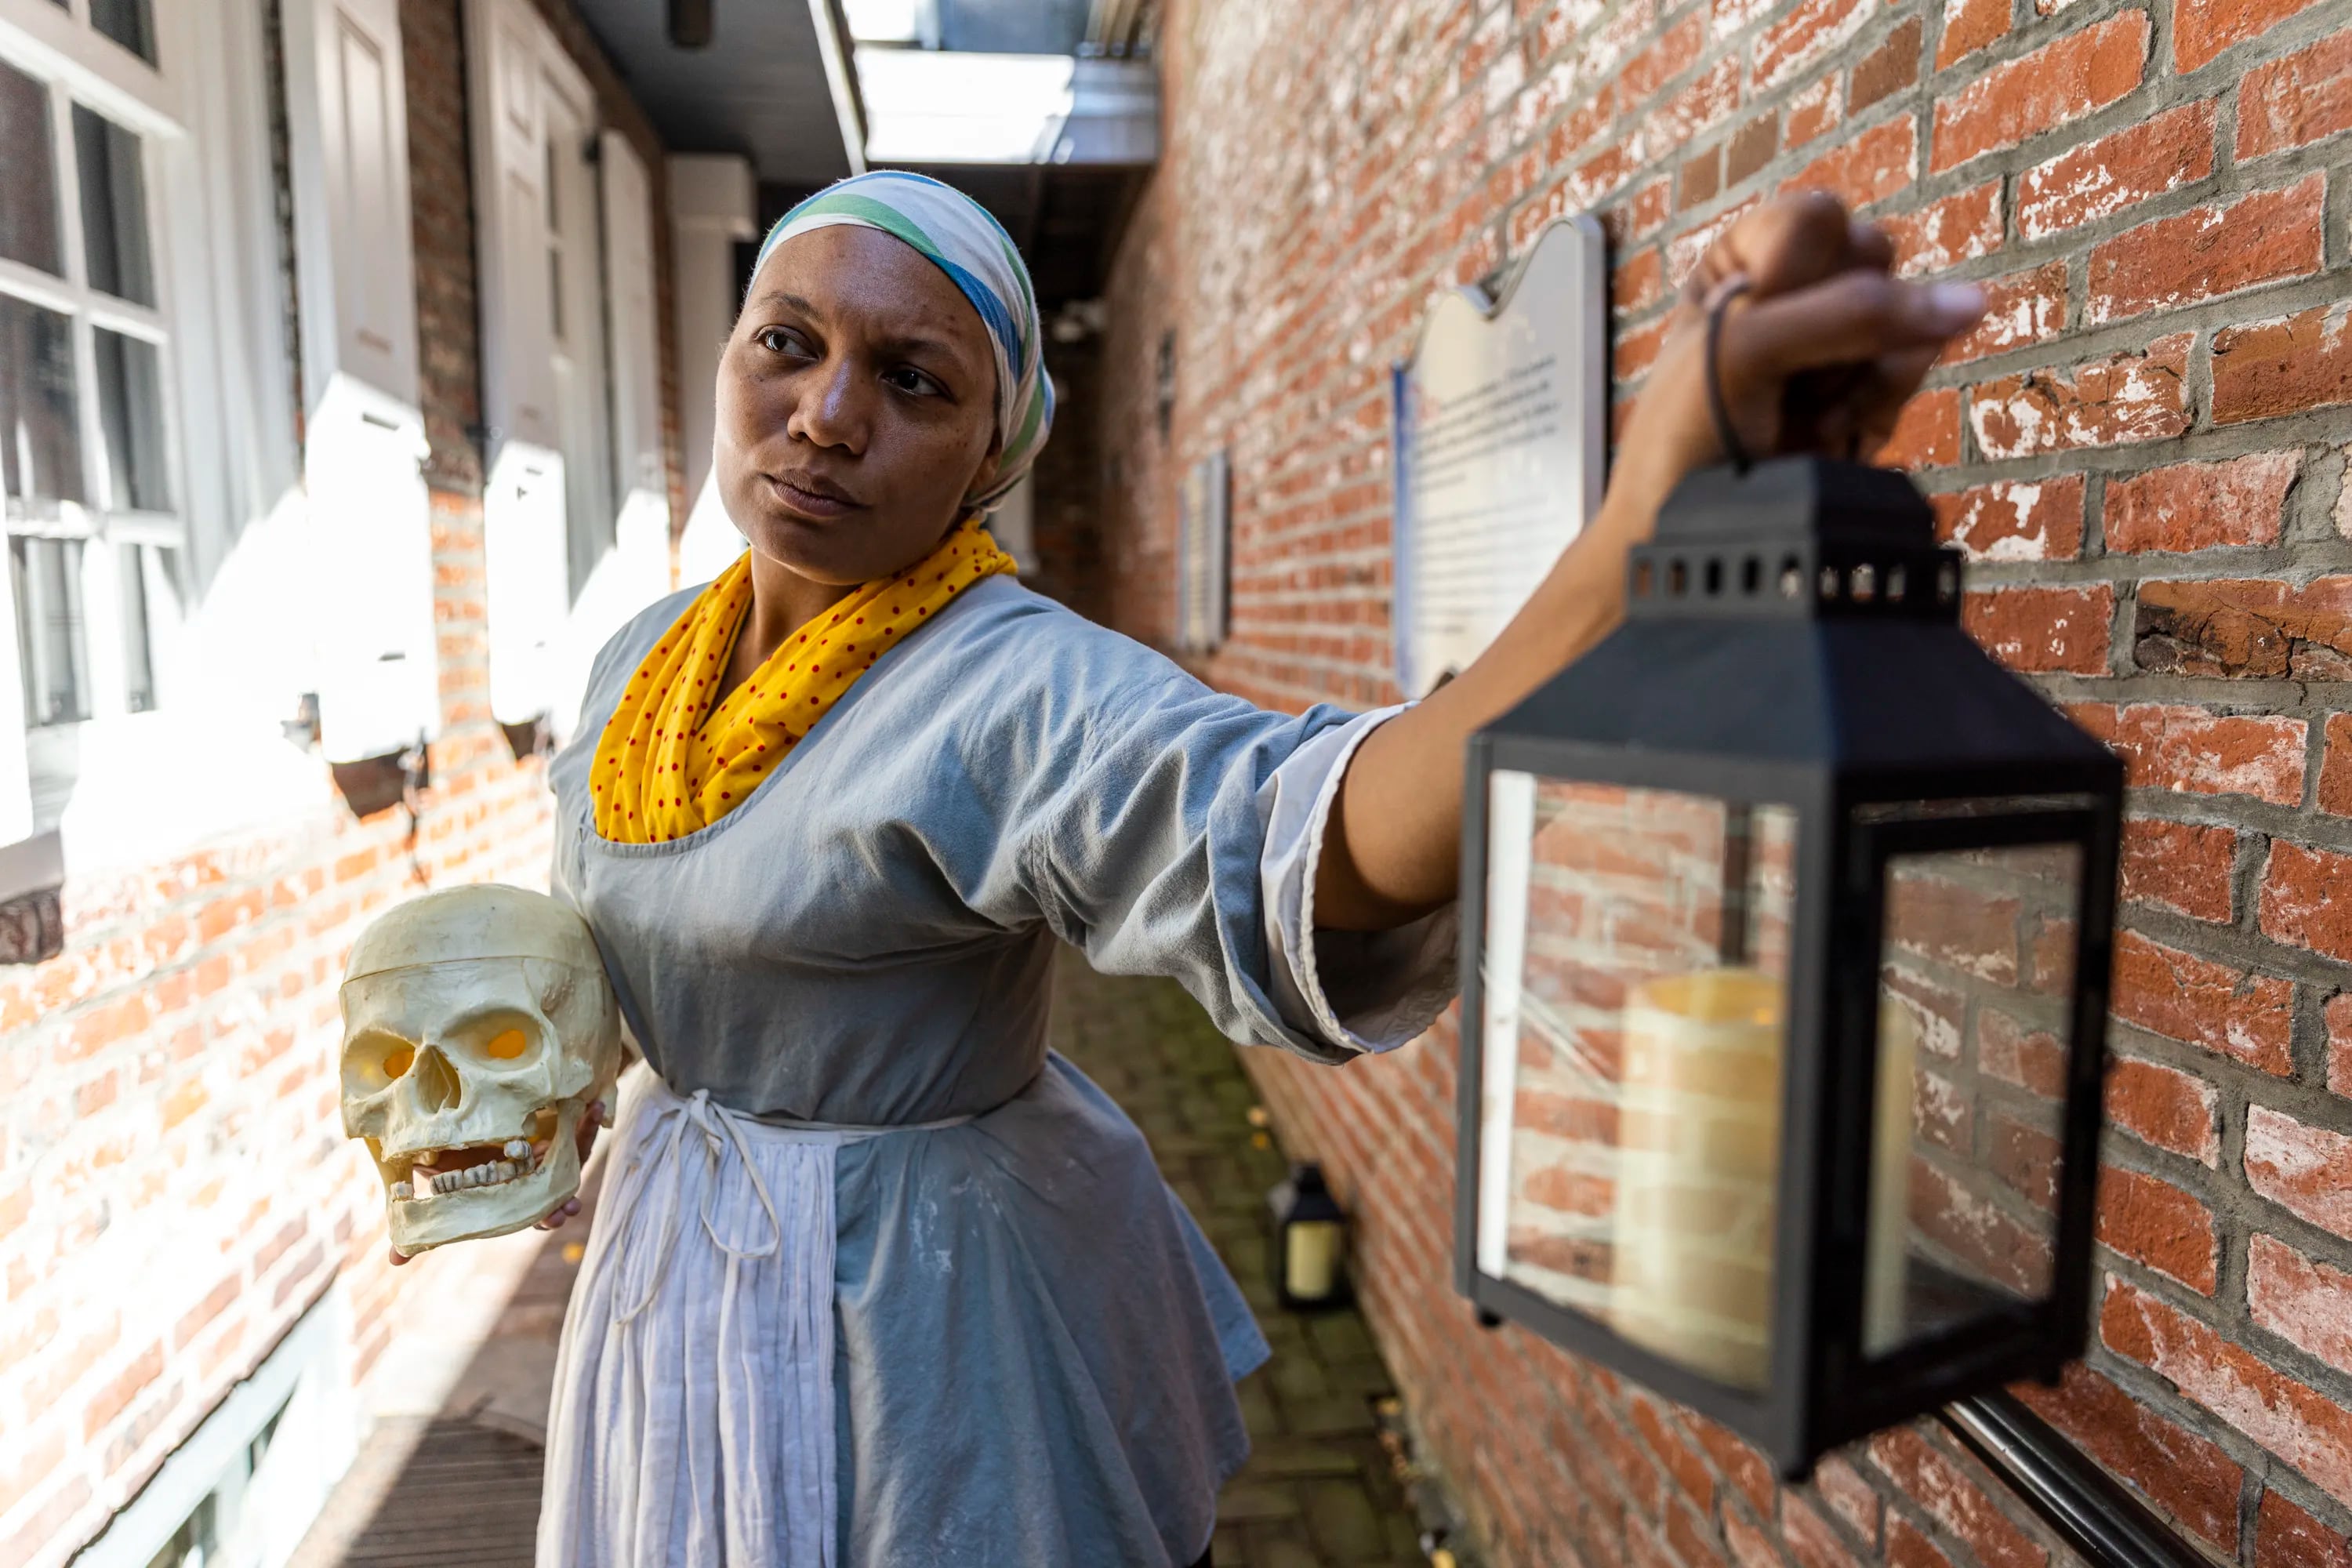 Courtney Mitchell, 36, of Overbook, Pa., Character Margaret Woodby who is a Cake Baker at the Betsy Ross House, poses for a photo at the Betsy Ross House in Philadelphia, Pa., Saturday., Oct., 22, 2022. The Betsy Ross House will be doing a night Spooky Twilight Halloween Tours.